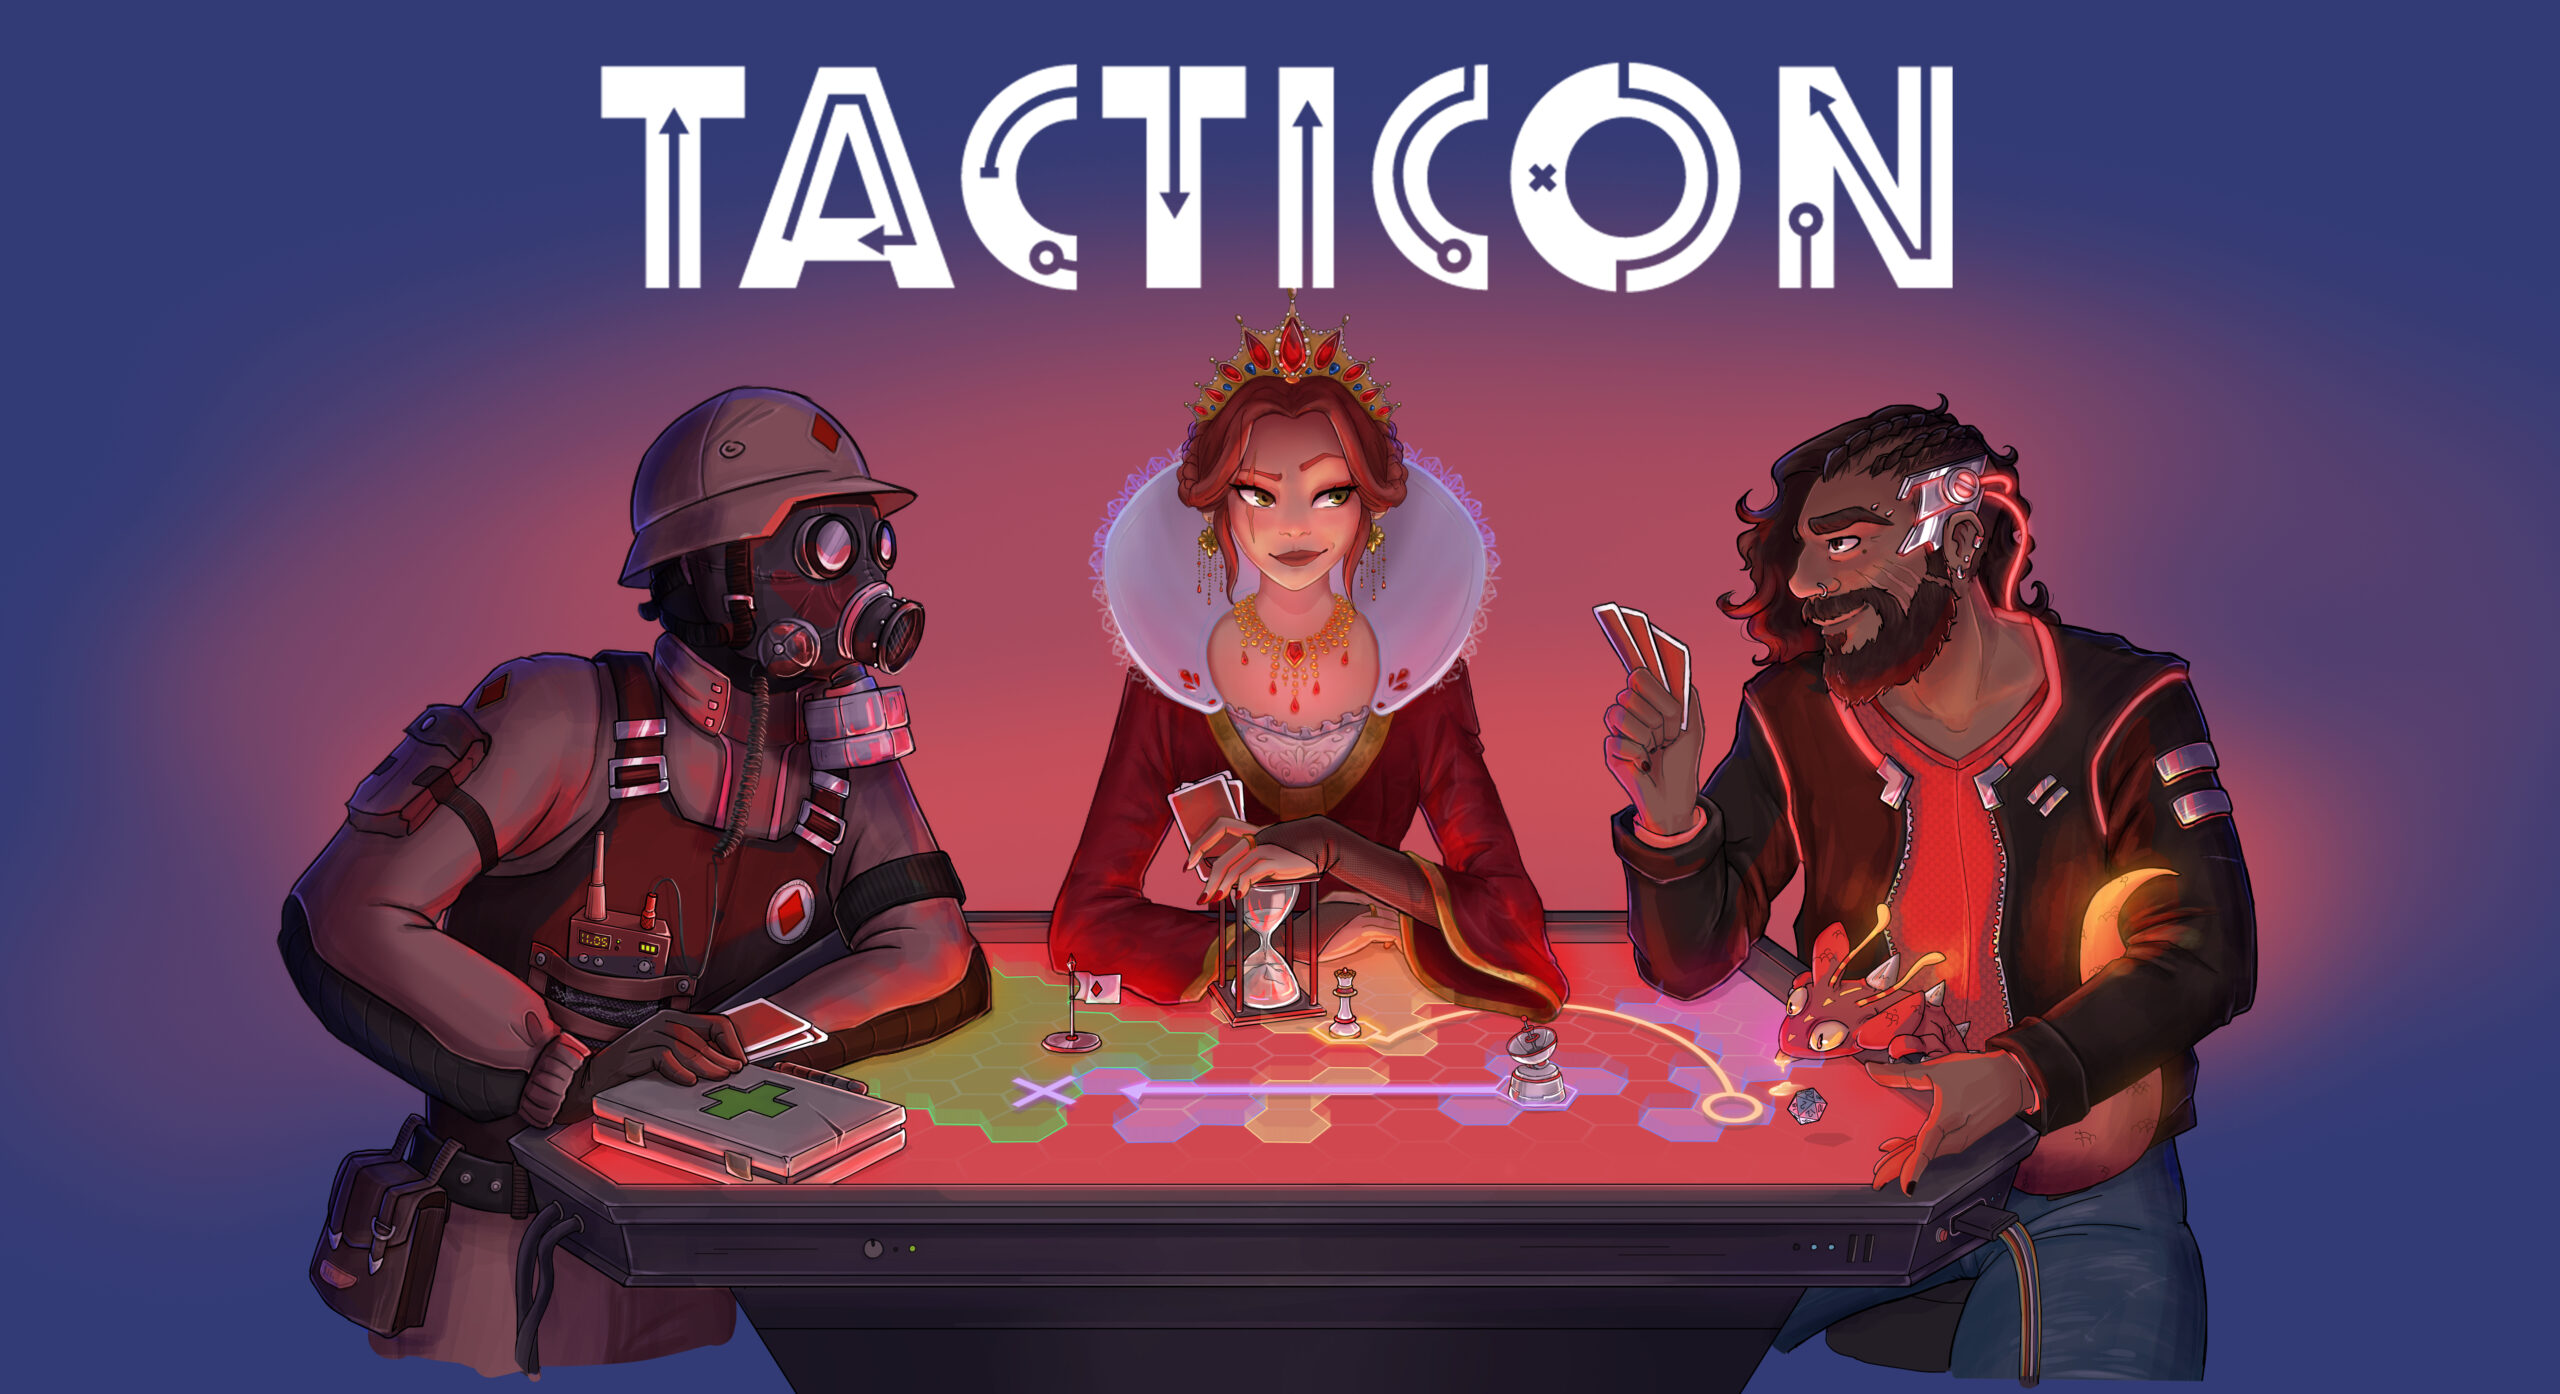 Tacticon 2023 highlights over 100 strategy games on Steam